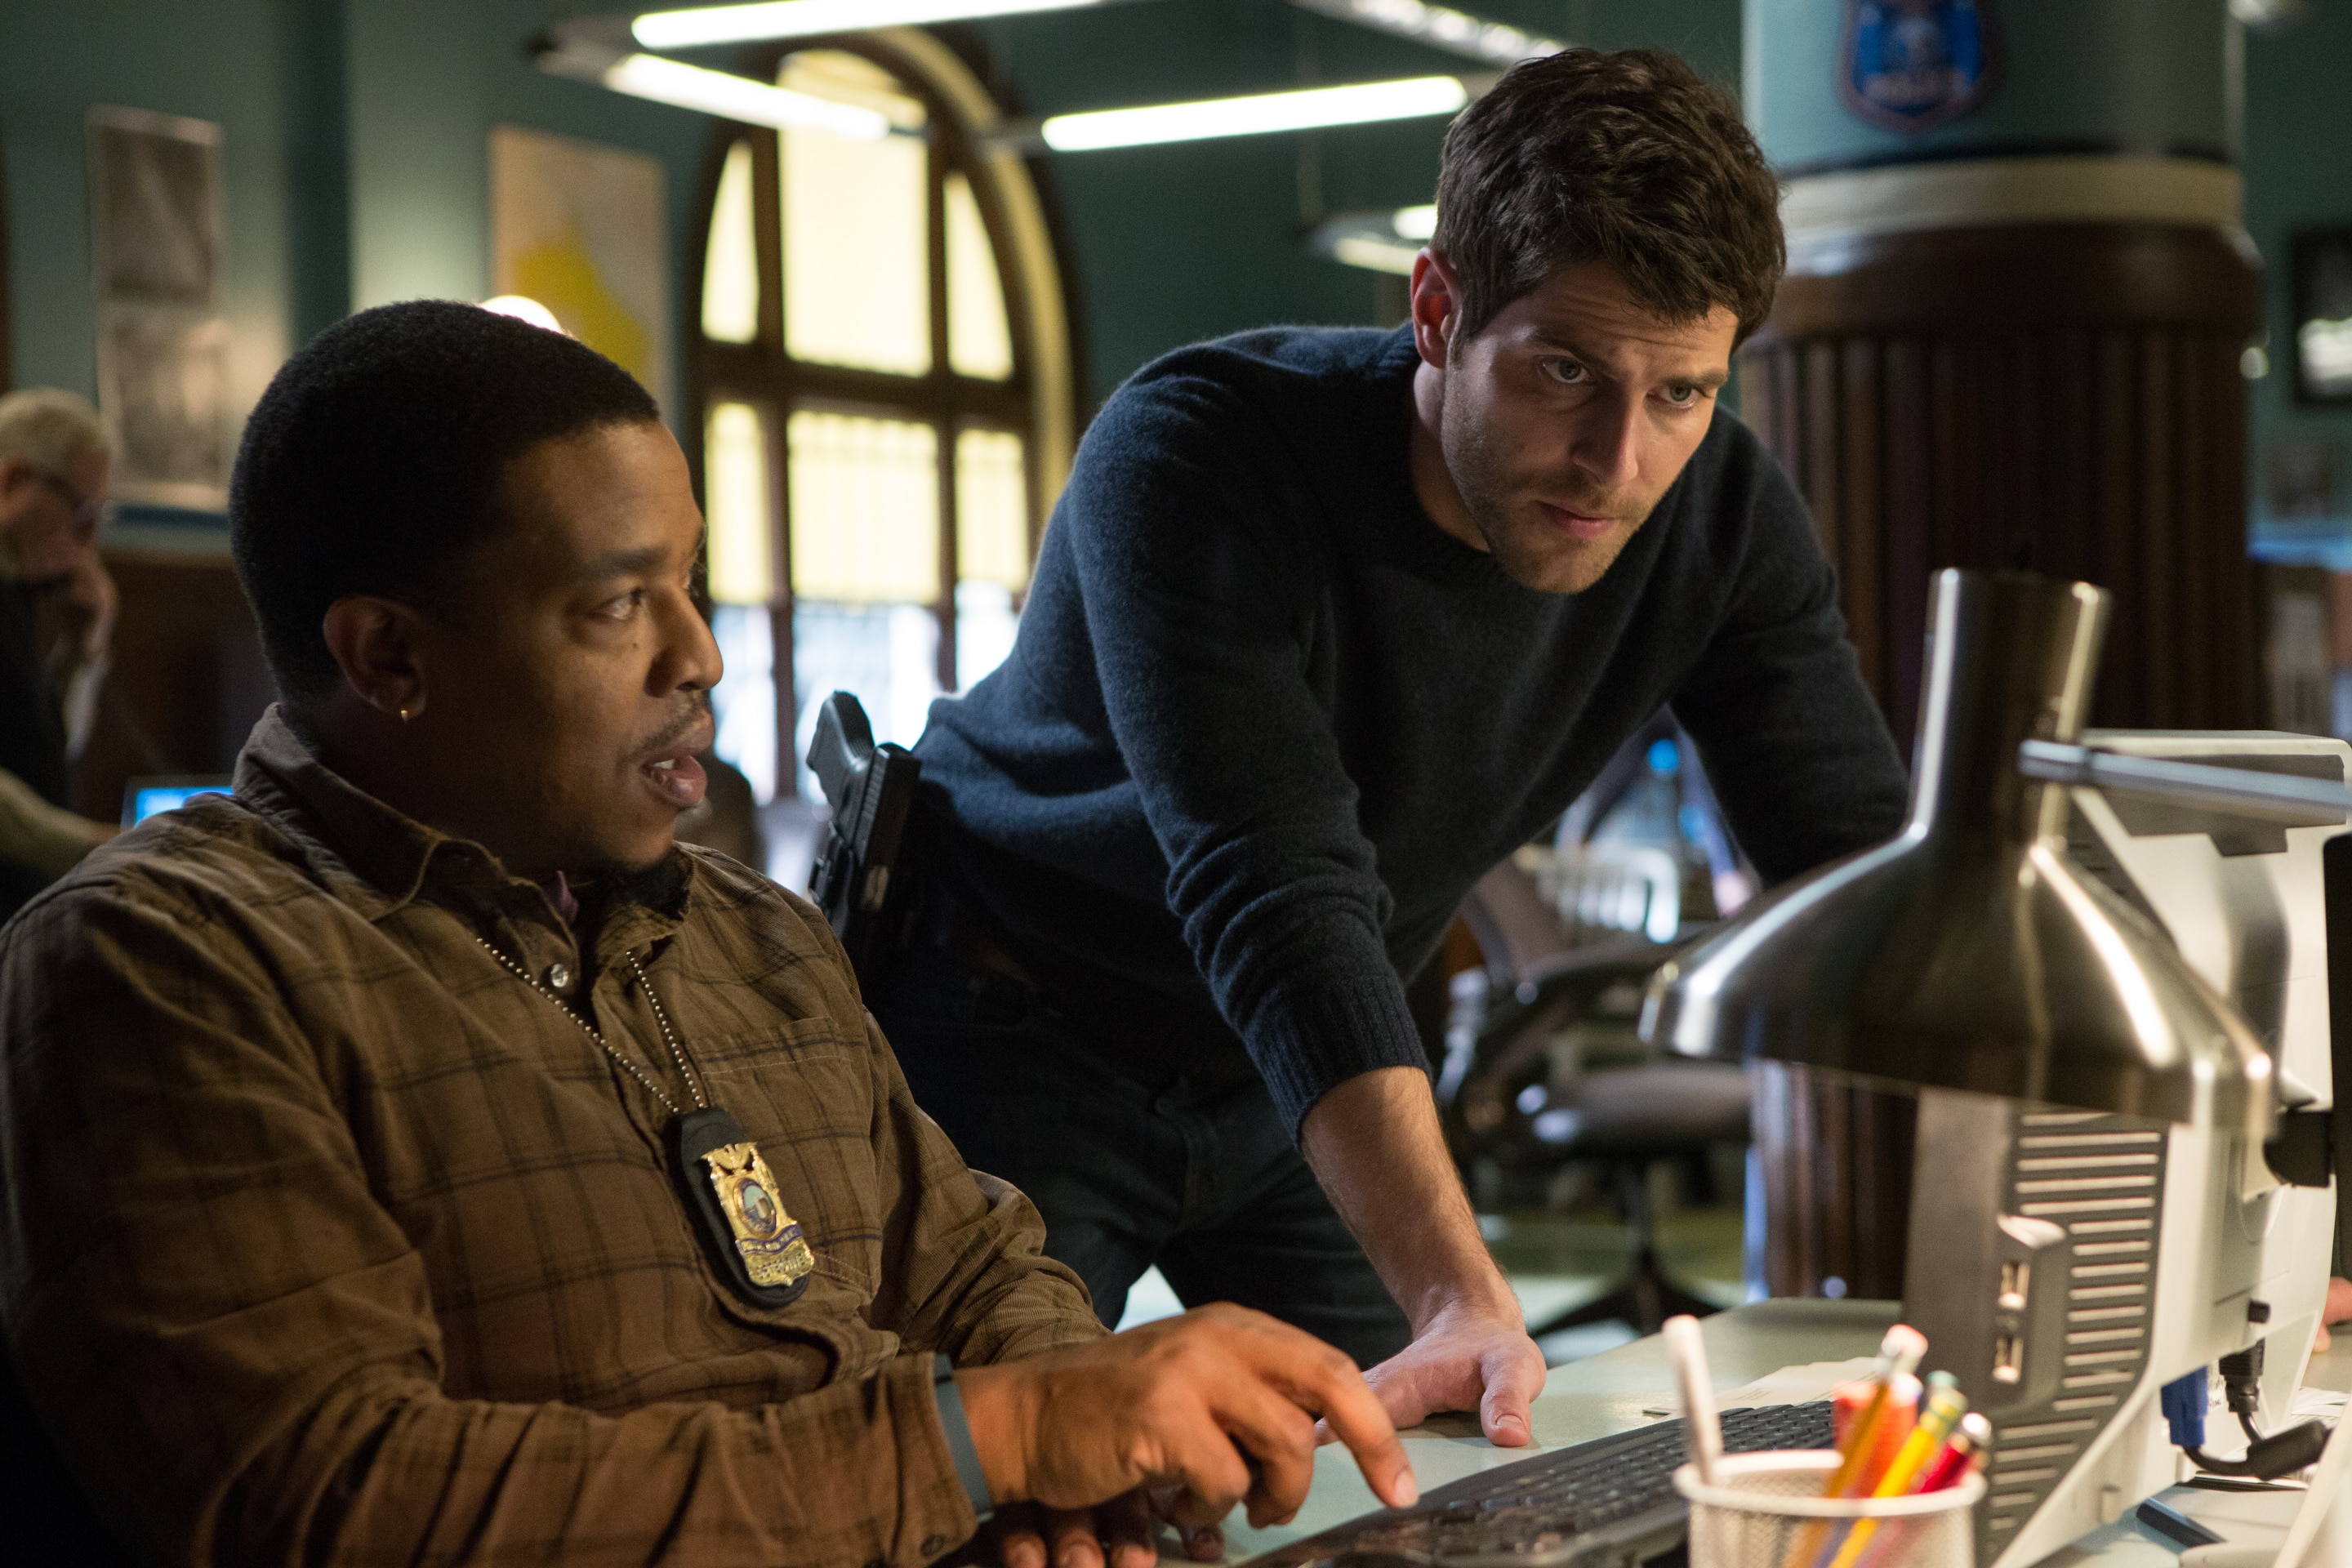 Grimm - Episode 317 - The Law of Sacrifice.